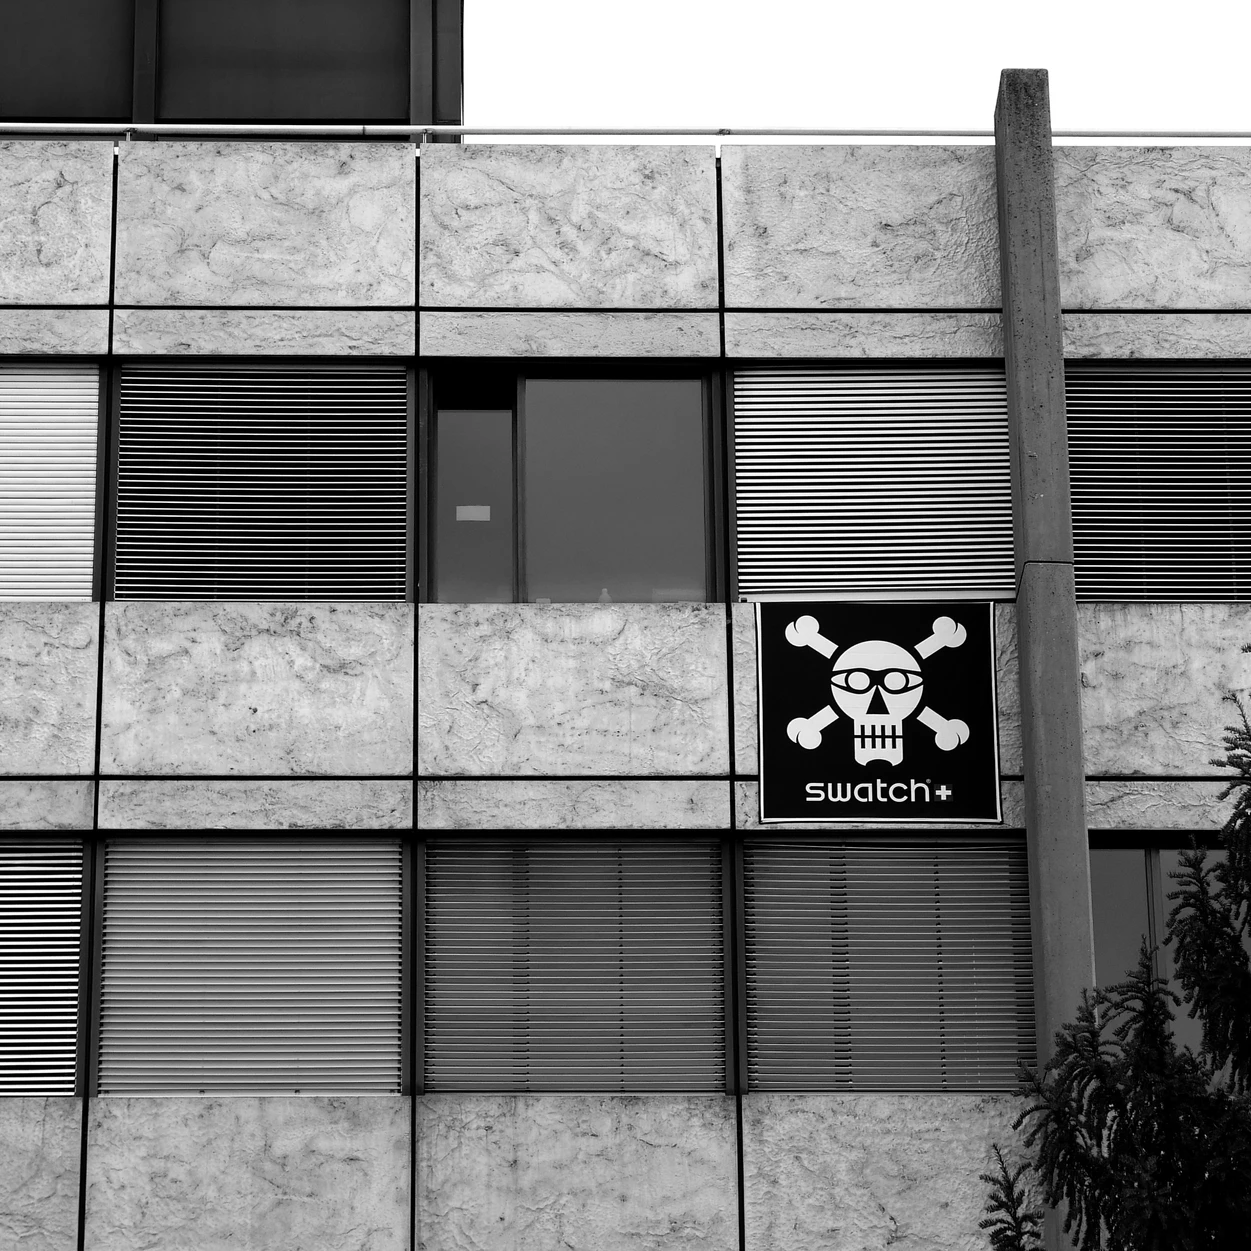 The Pirate Flag Outside Swatch Group HQ